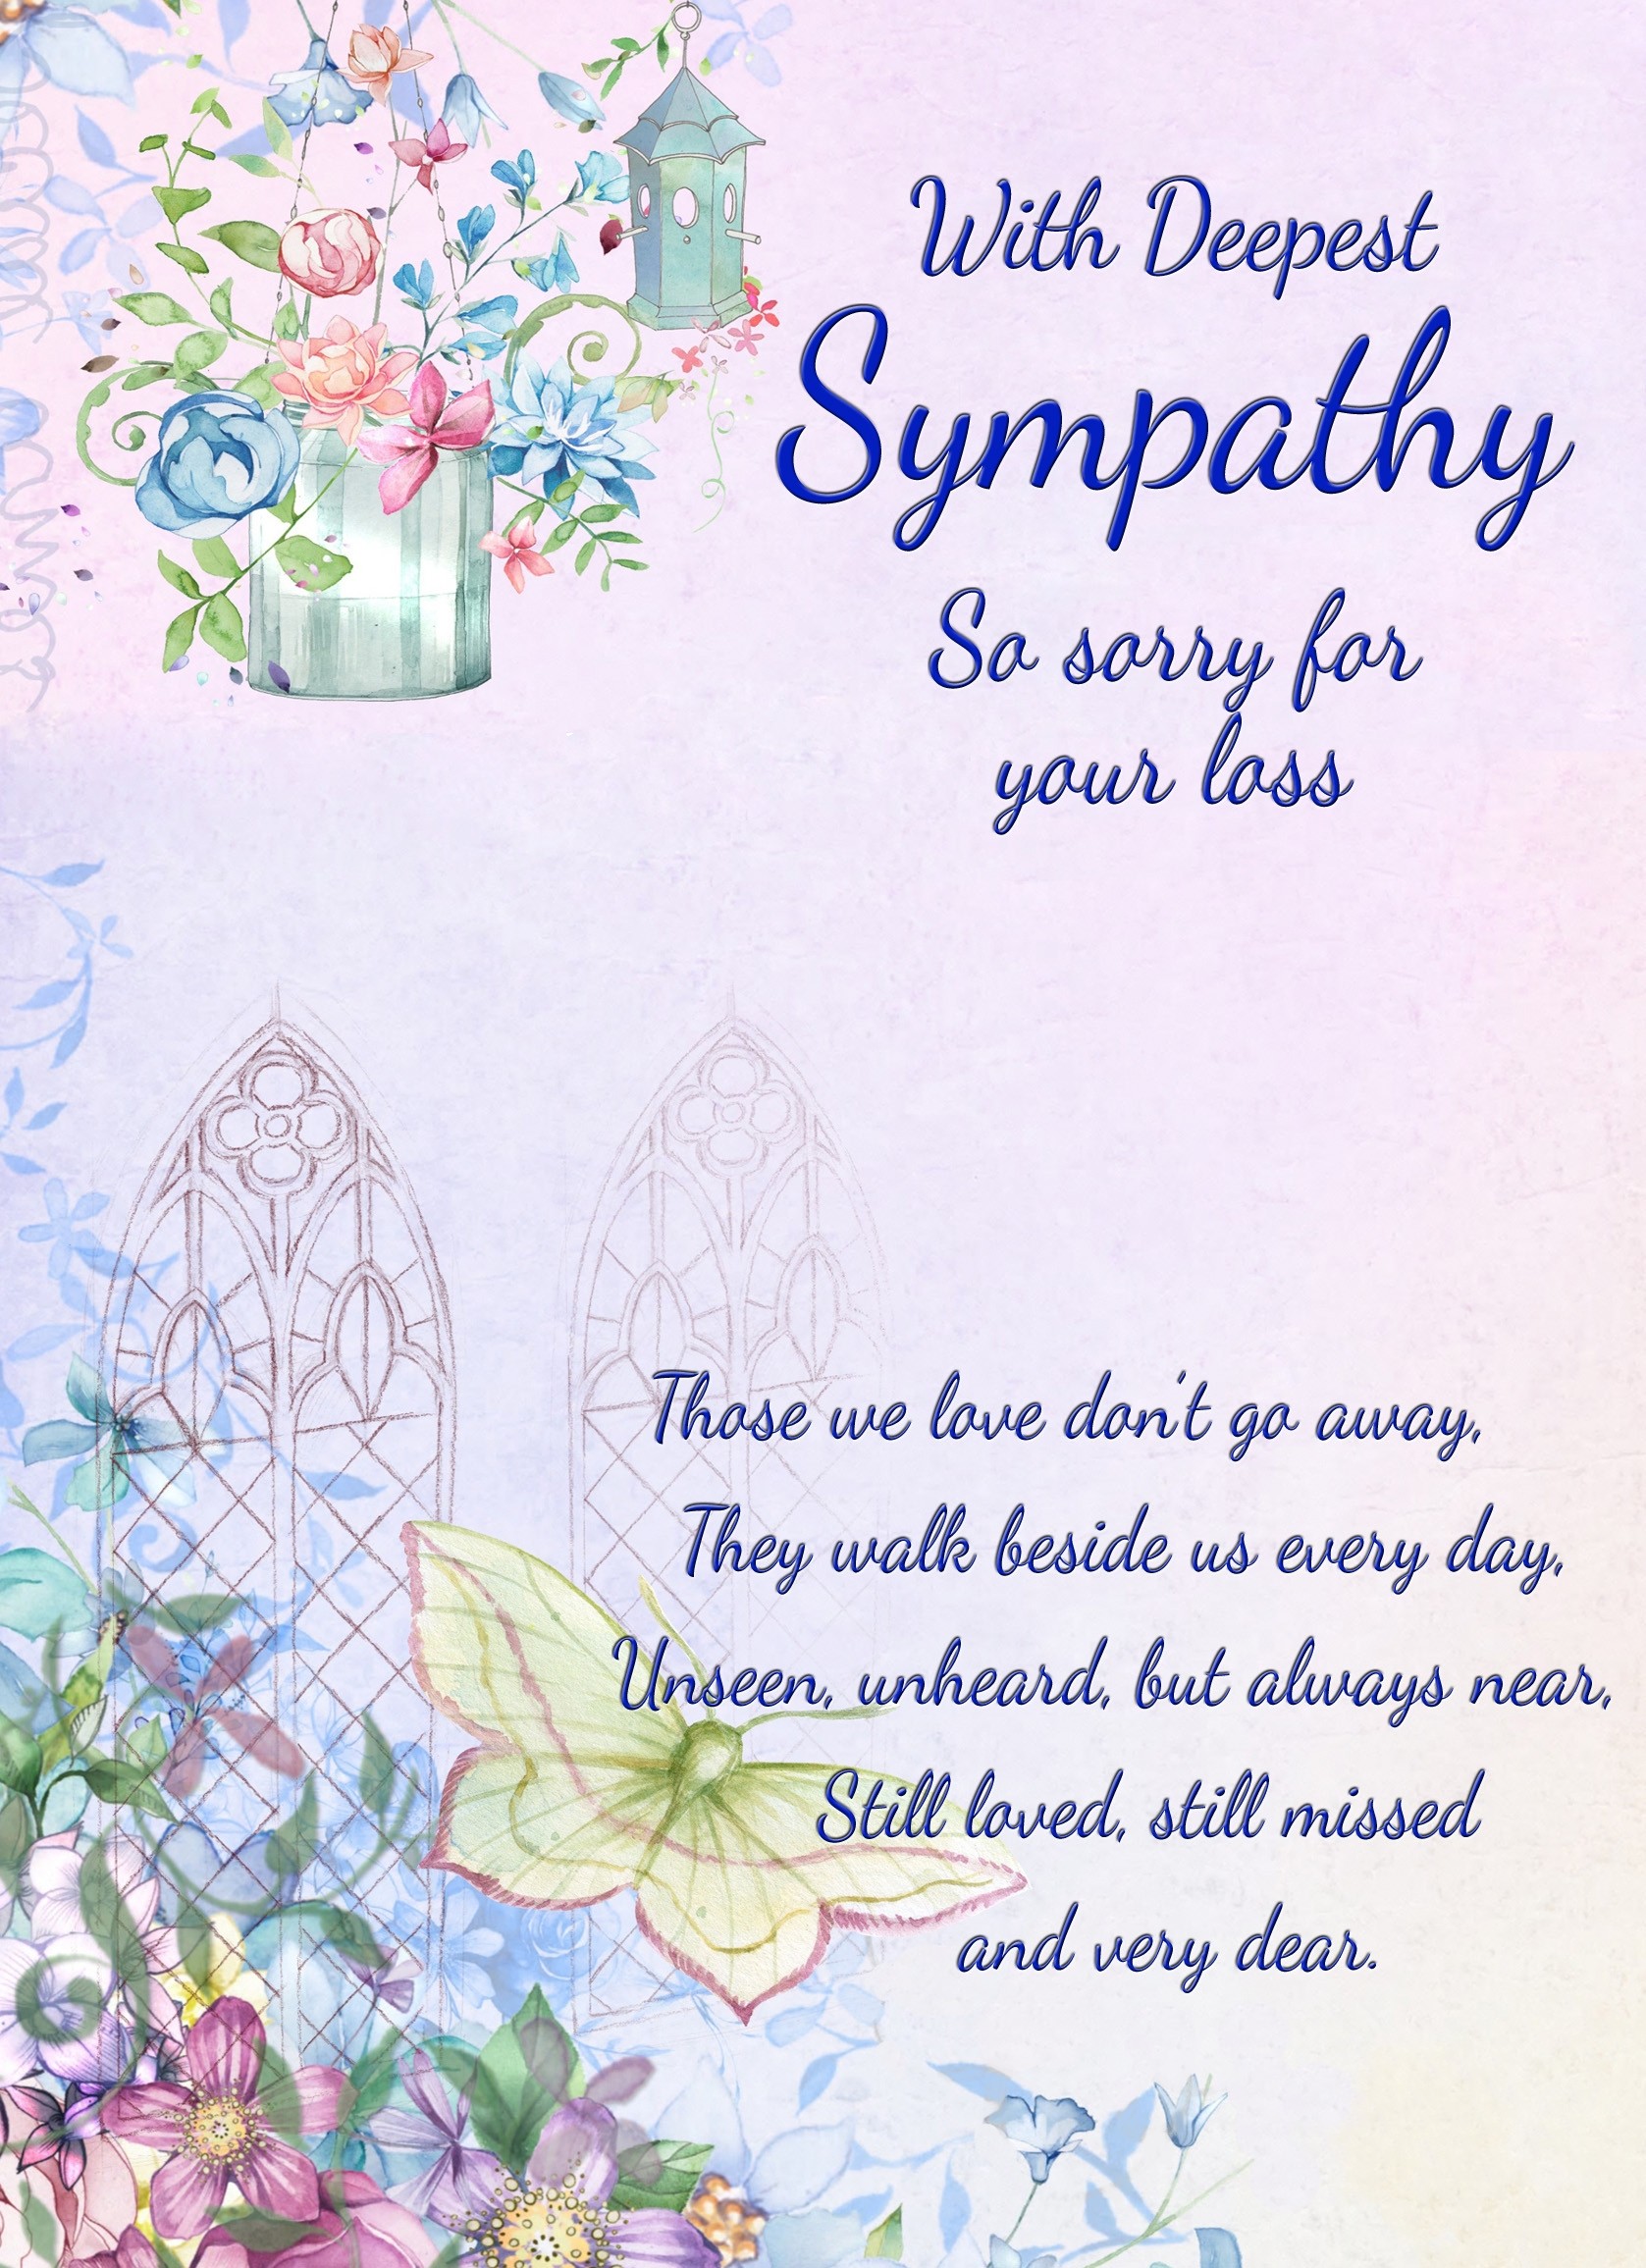 Sympathy Bereavement Card (With Deepest Sympathy, Butterfly)